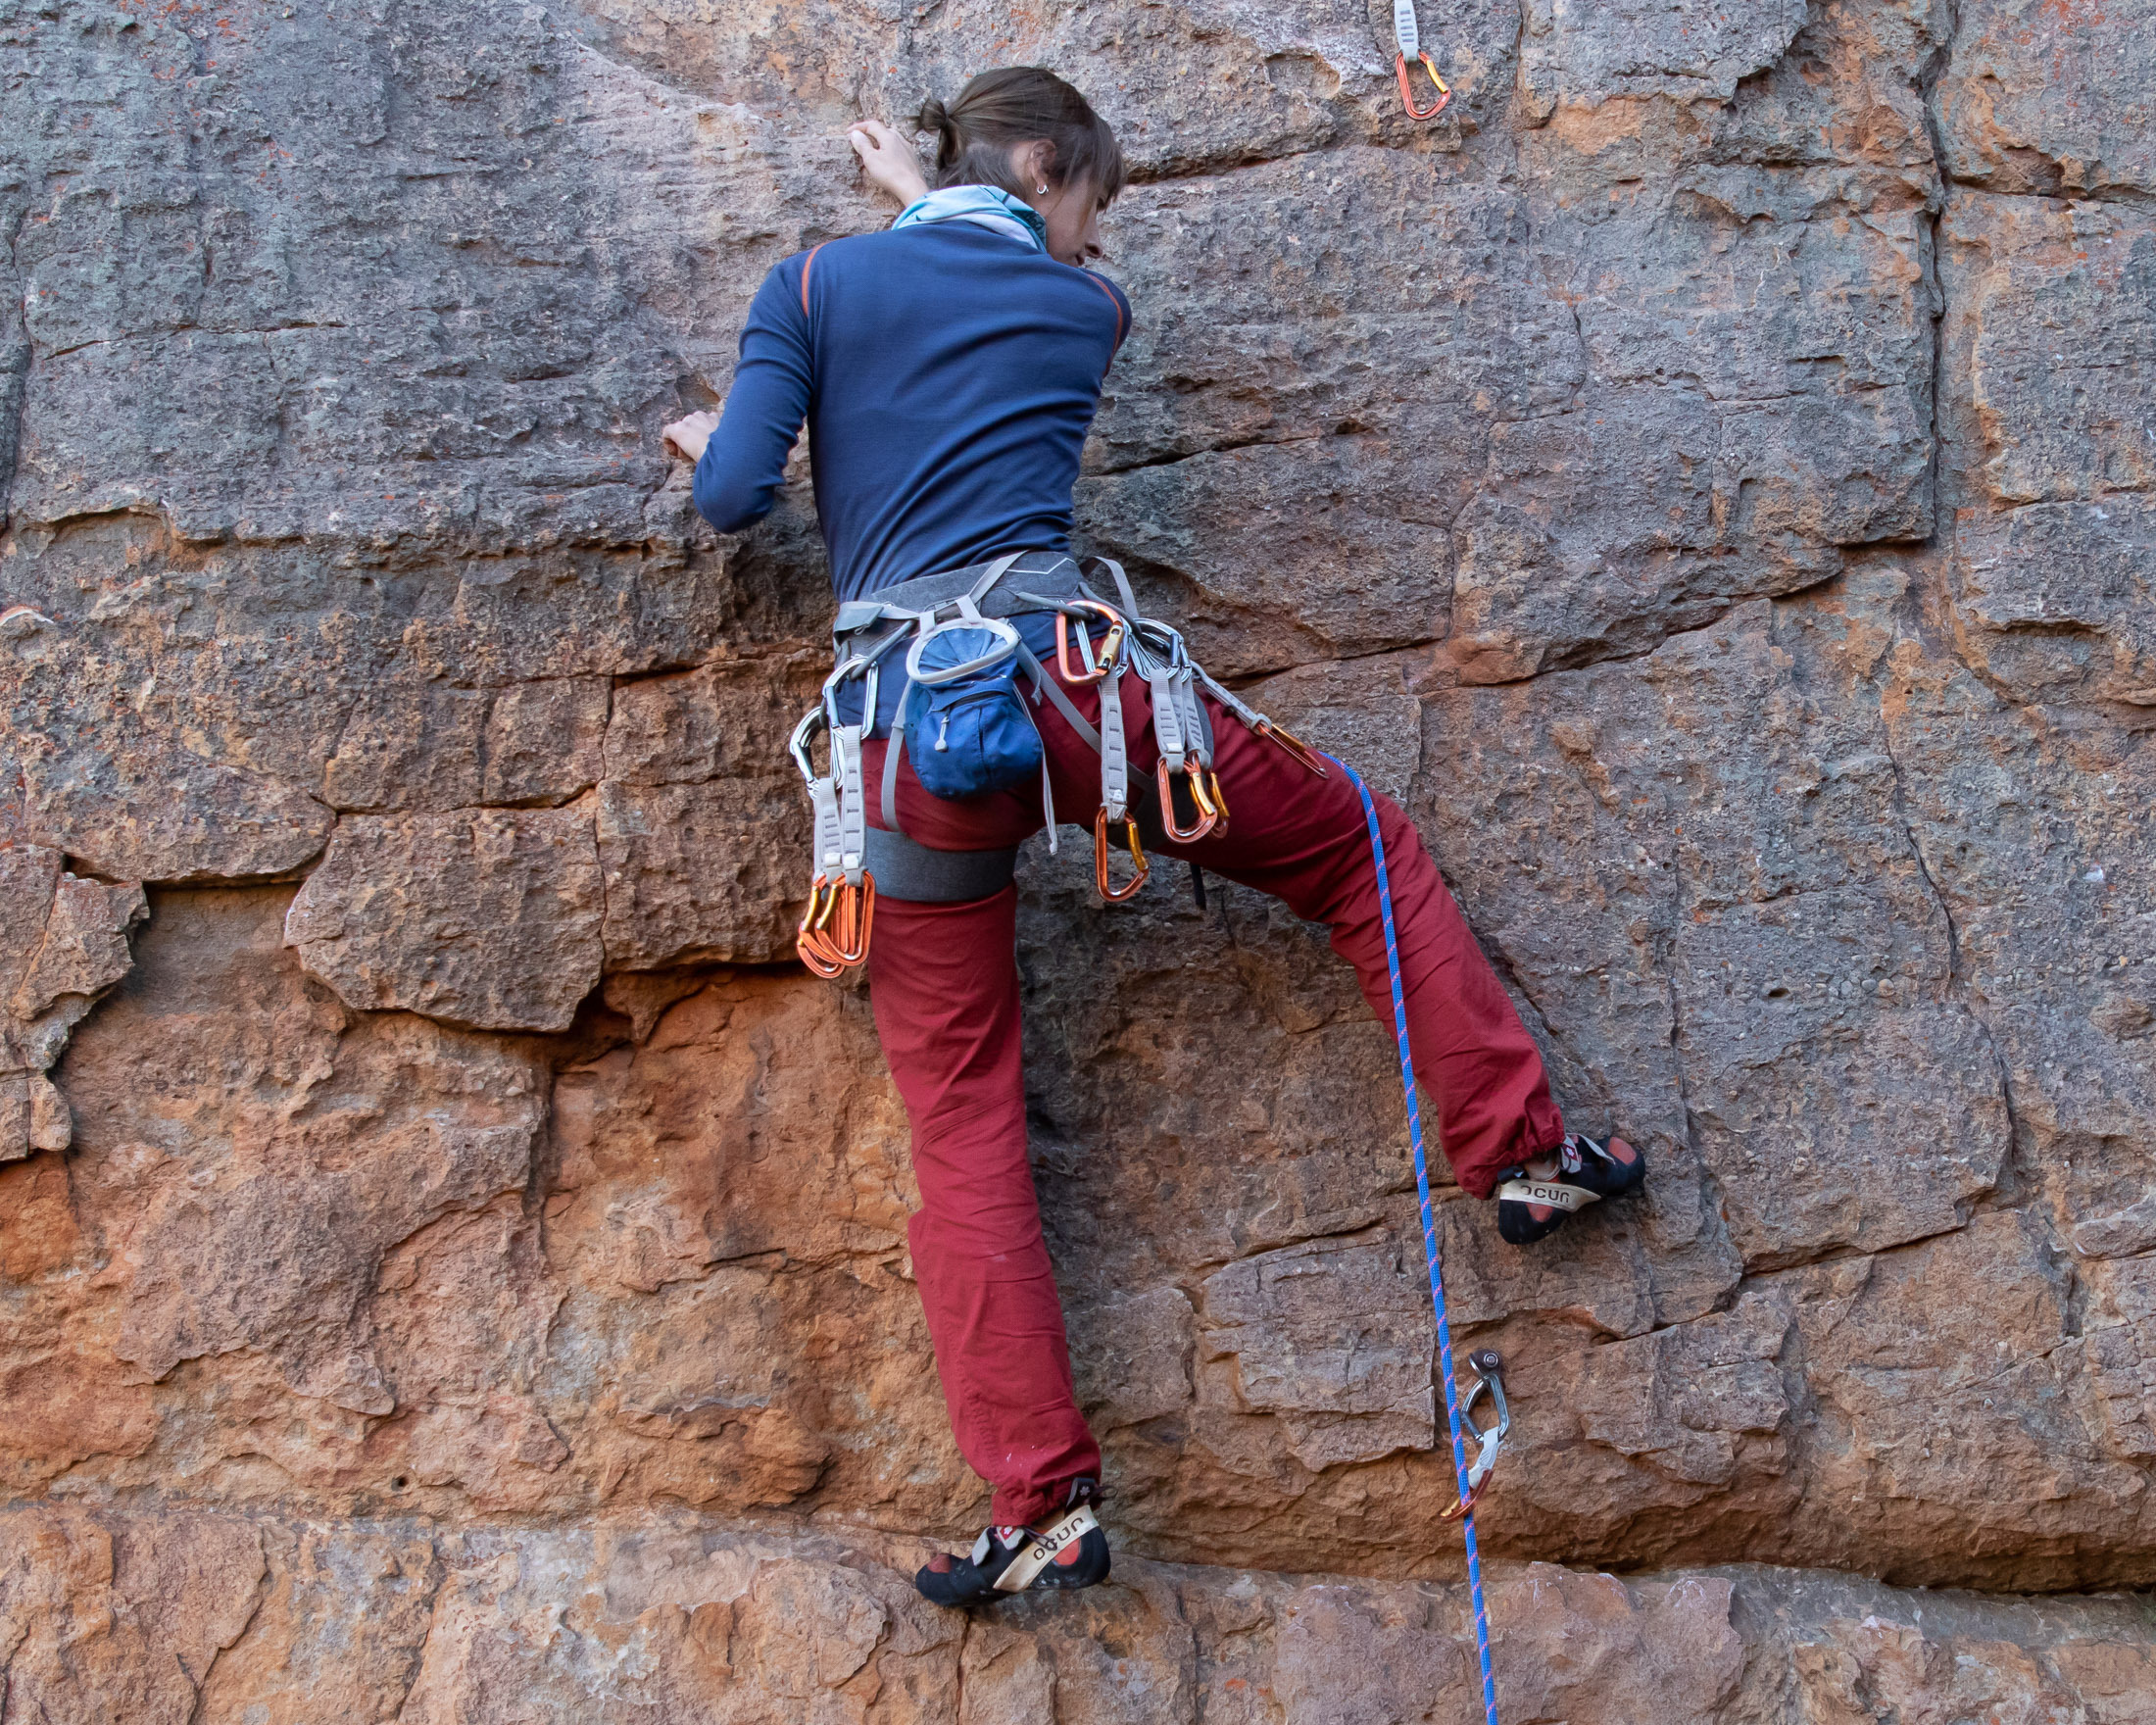 Climber with leg behind rope